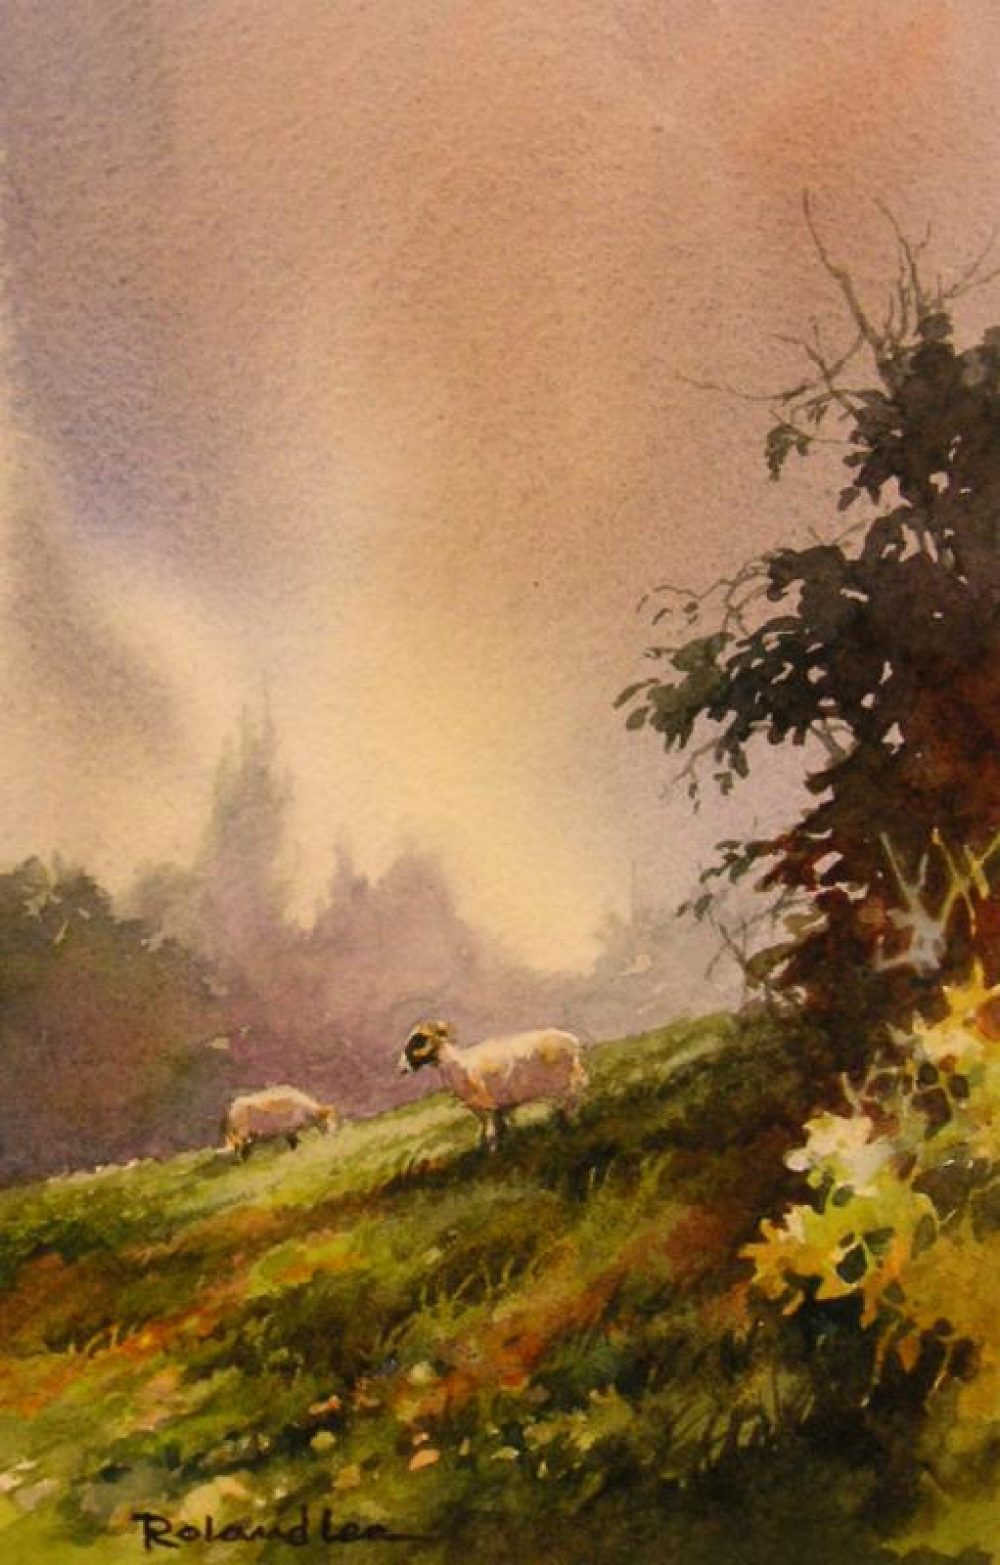 English Sheep on the Hillside - Original painting by Roland Lee of a scene in the Yorkshire Dales